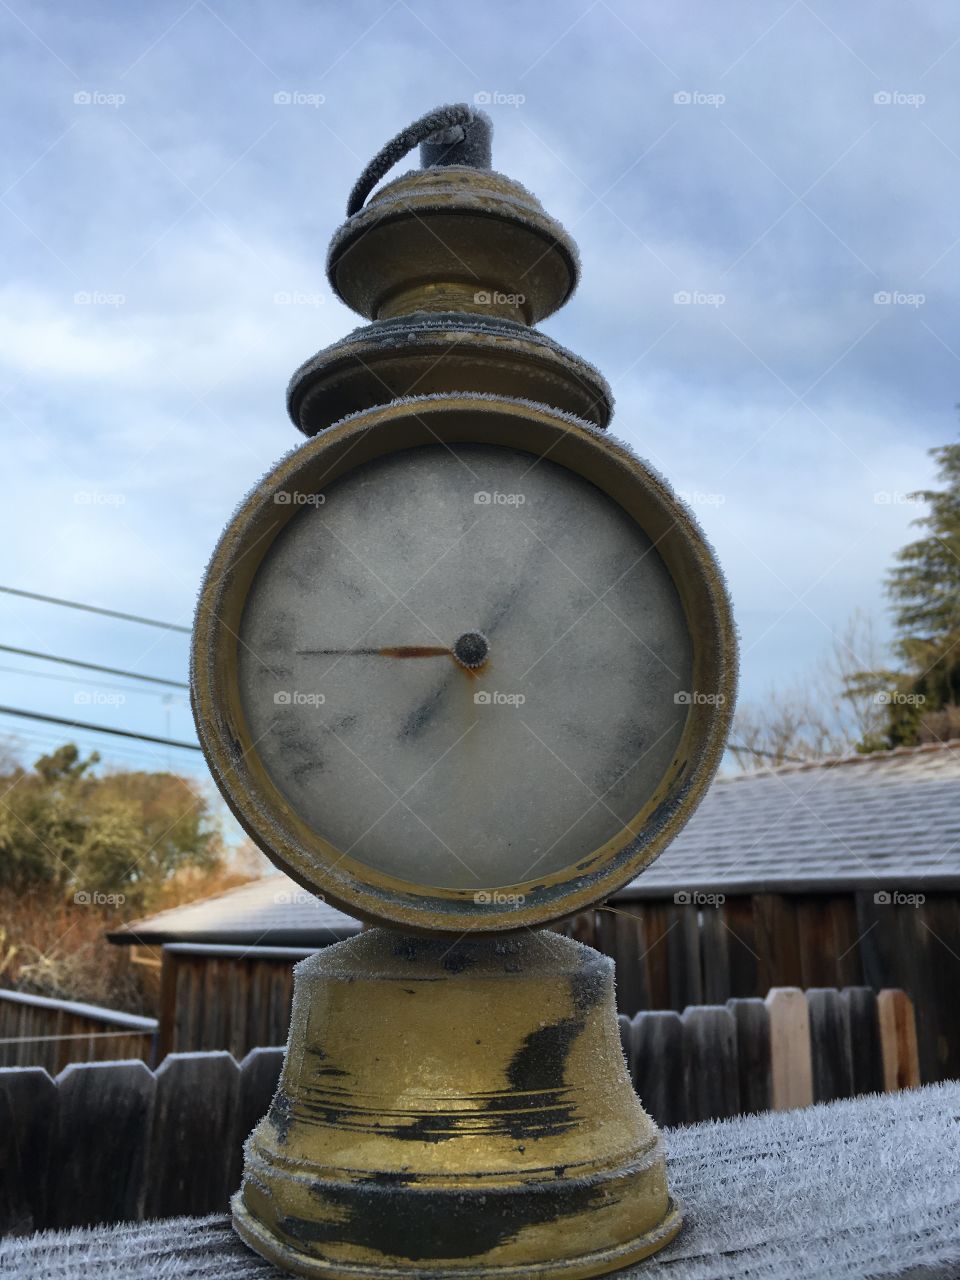 frost on clock